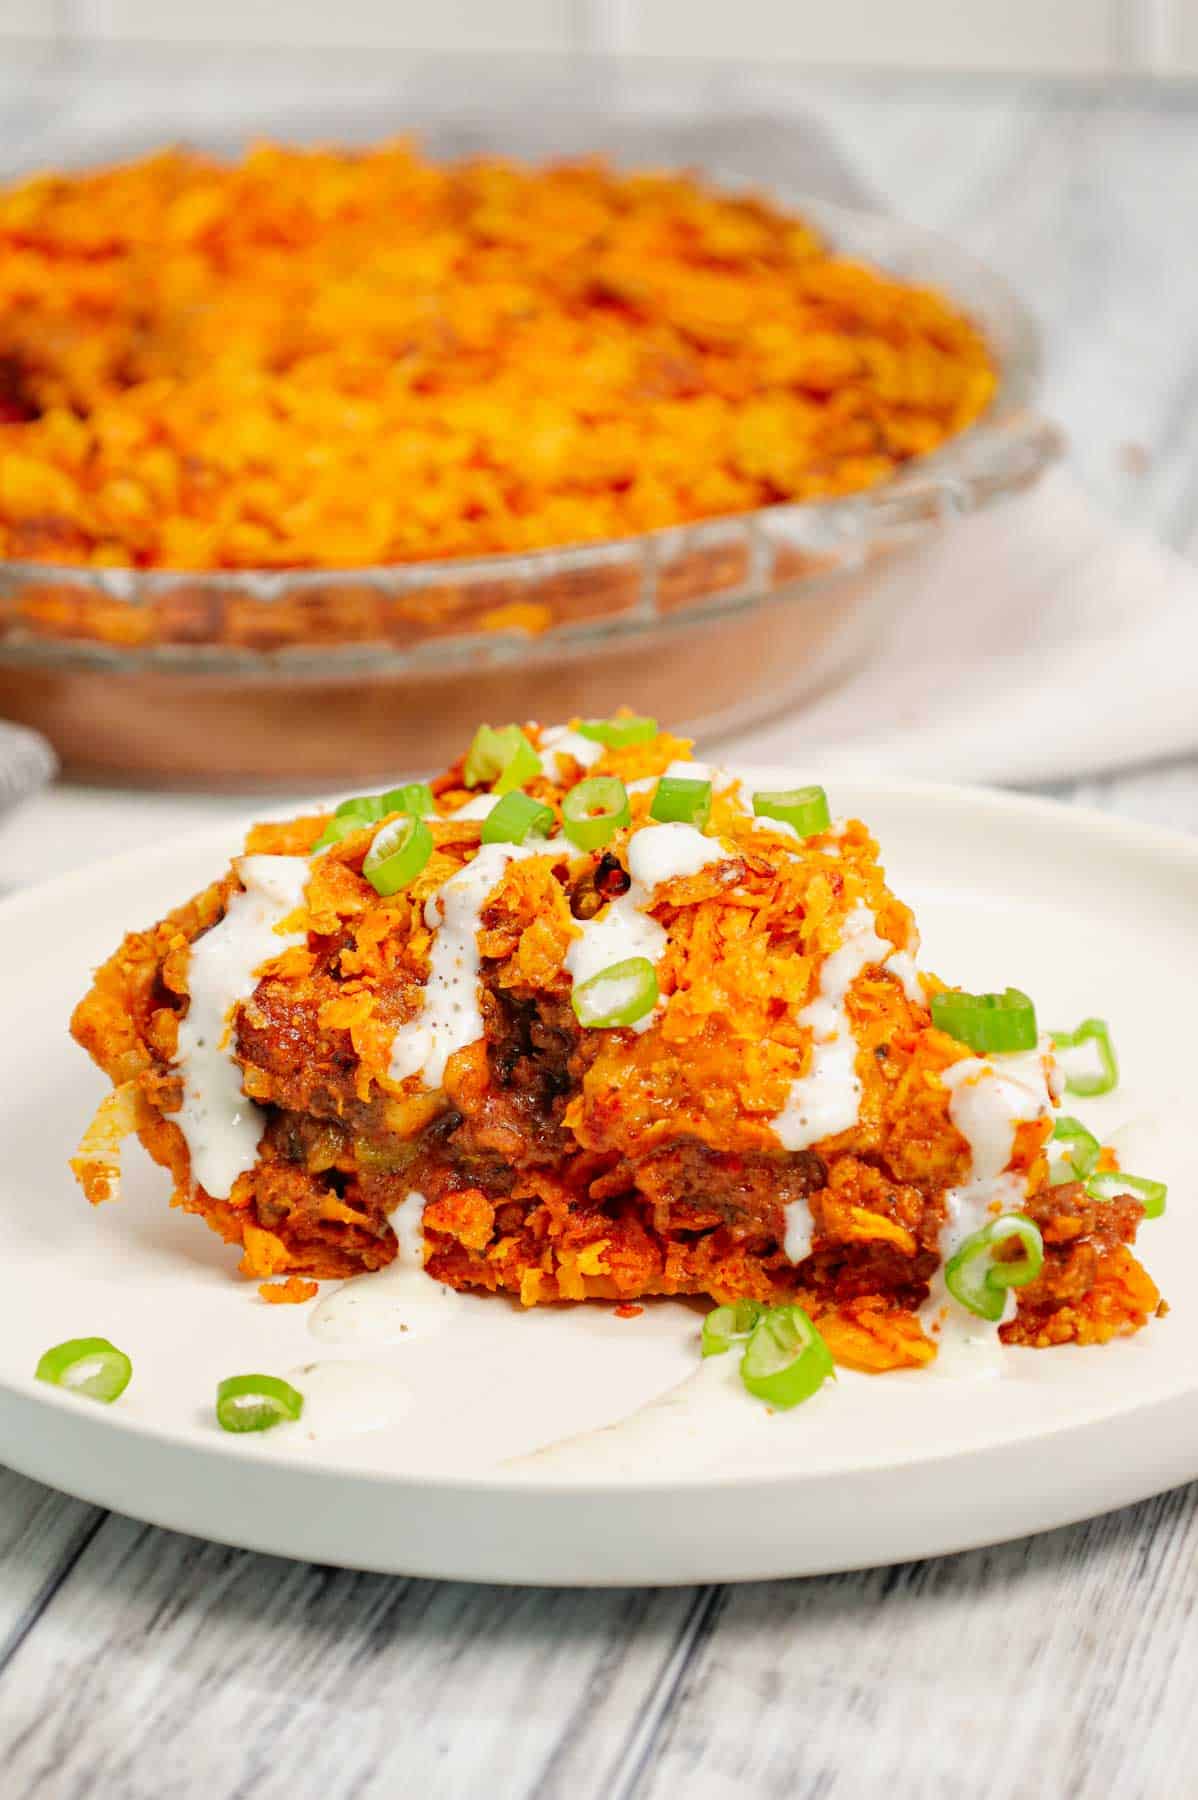 Dorito Taco Pie is an easy ground beef dinner recipe using a store bought deep dish pie crust loaded with crumbled Doritos nacho chips, beef taco meat, ranch dressing, salsa and shredded cheese.